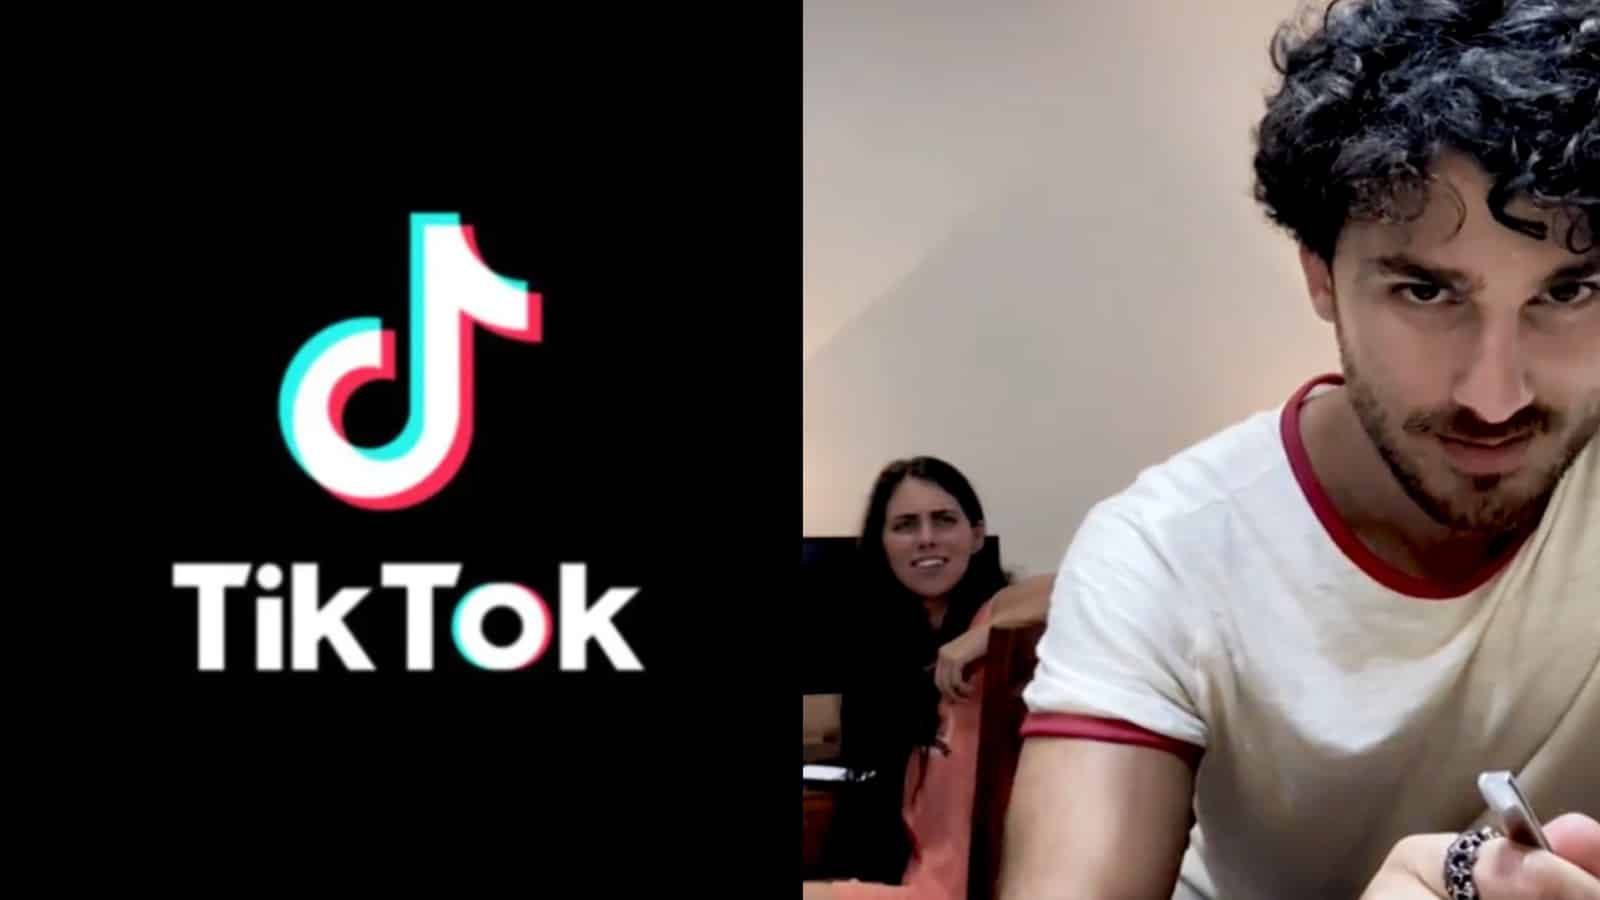 Who is Candice On TikTok  What Is The Punchline Behind The Joke  - 28